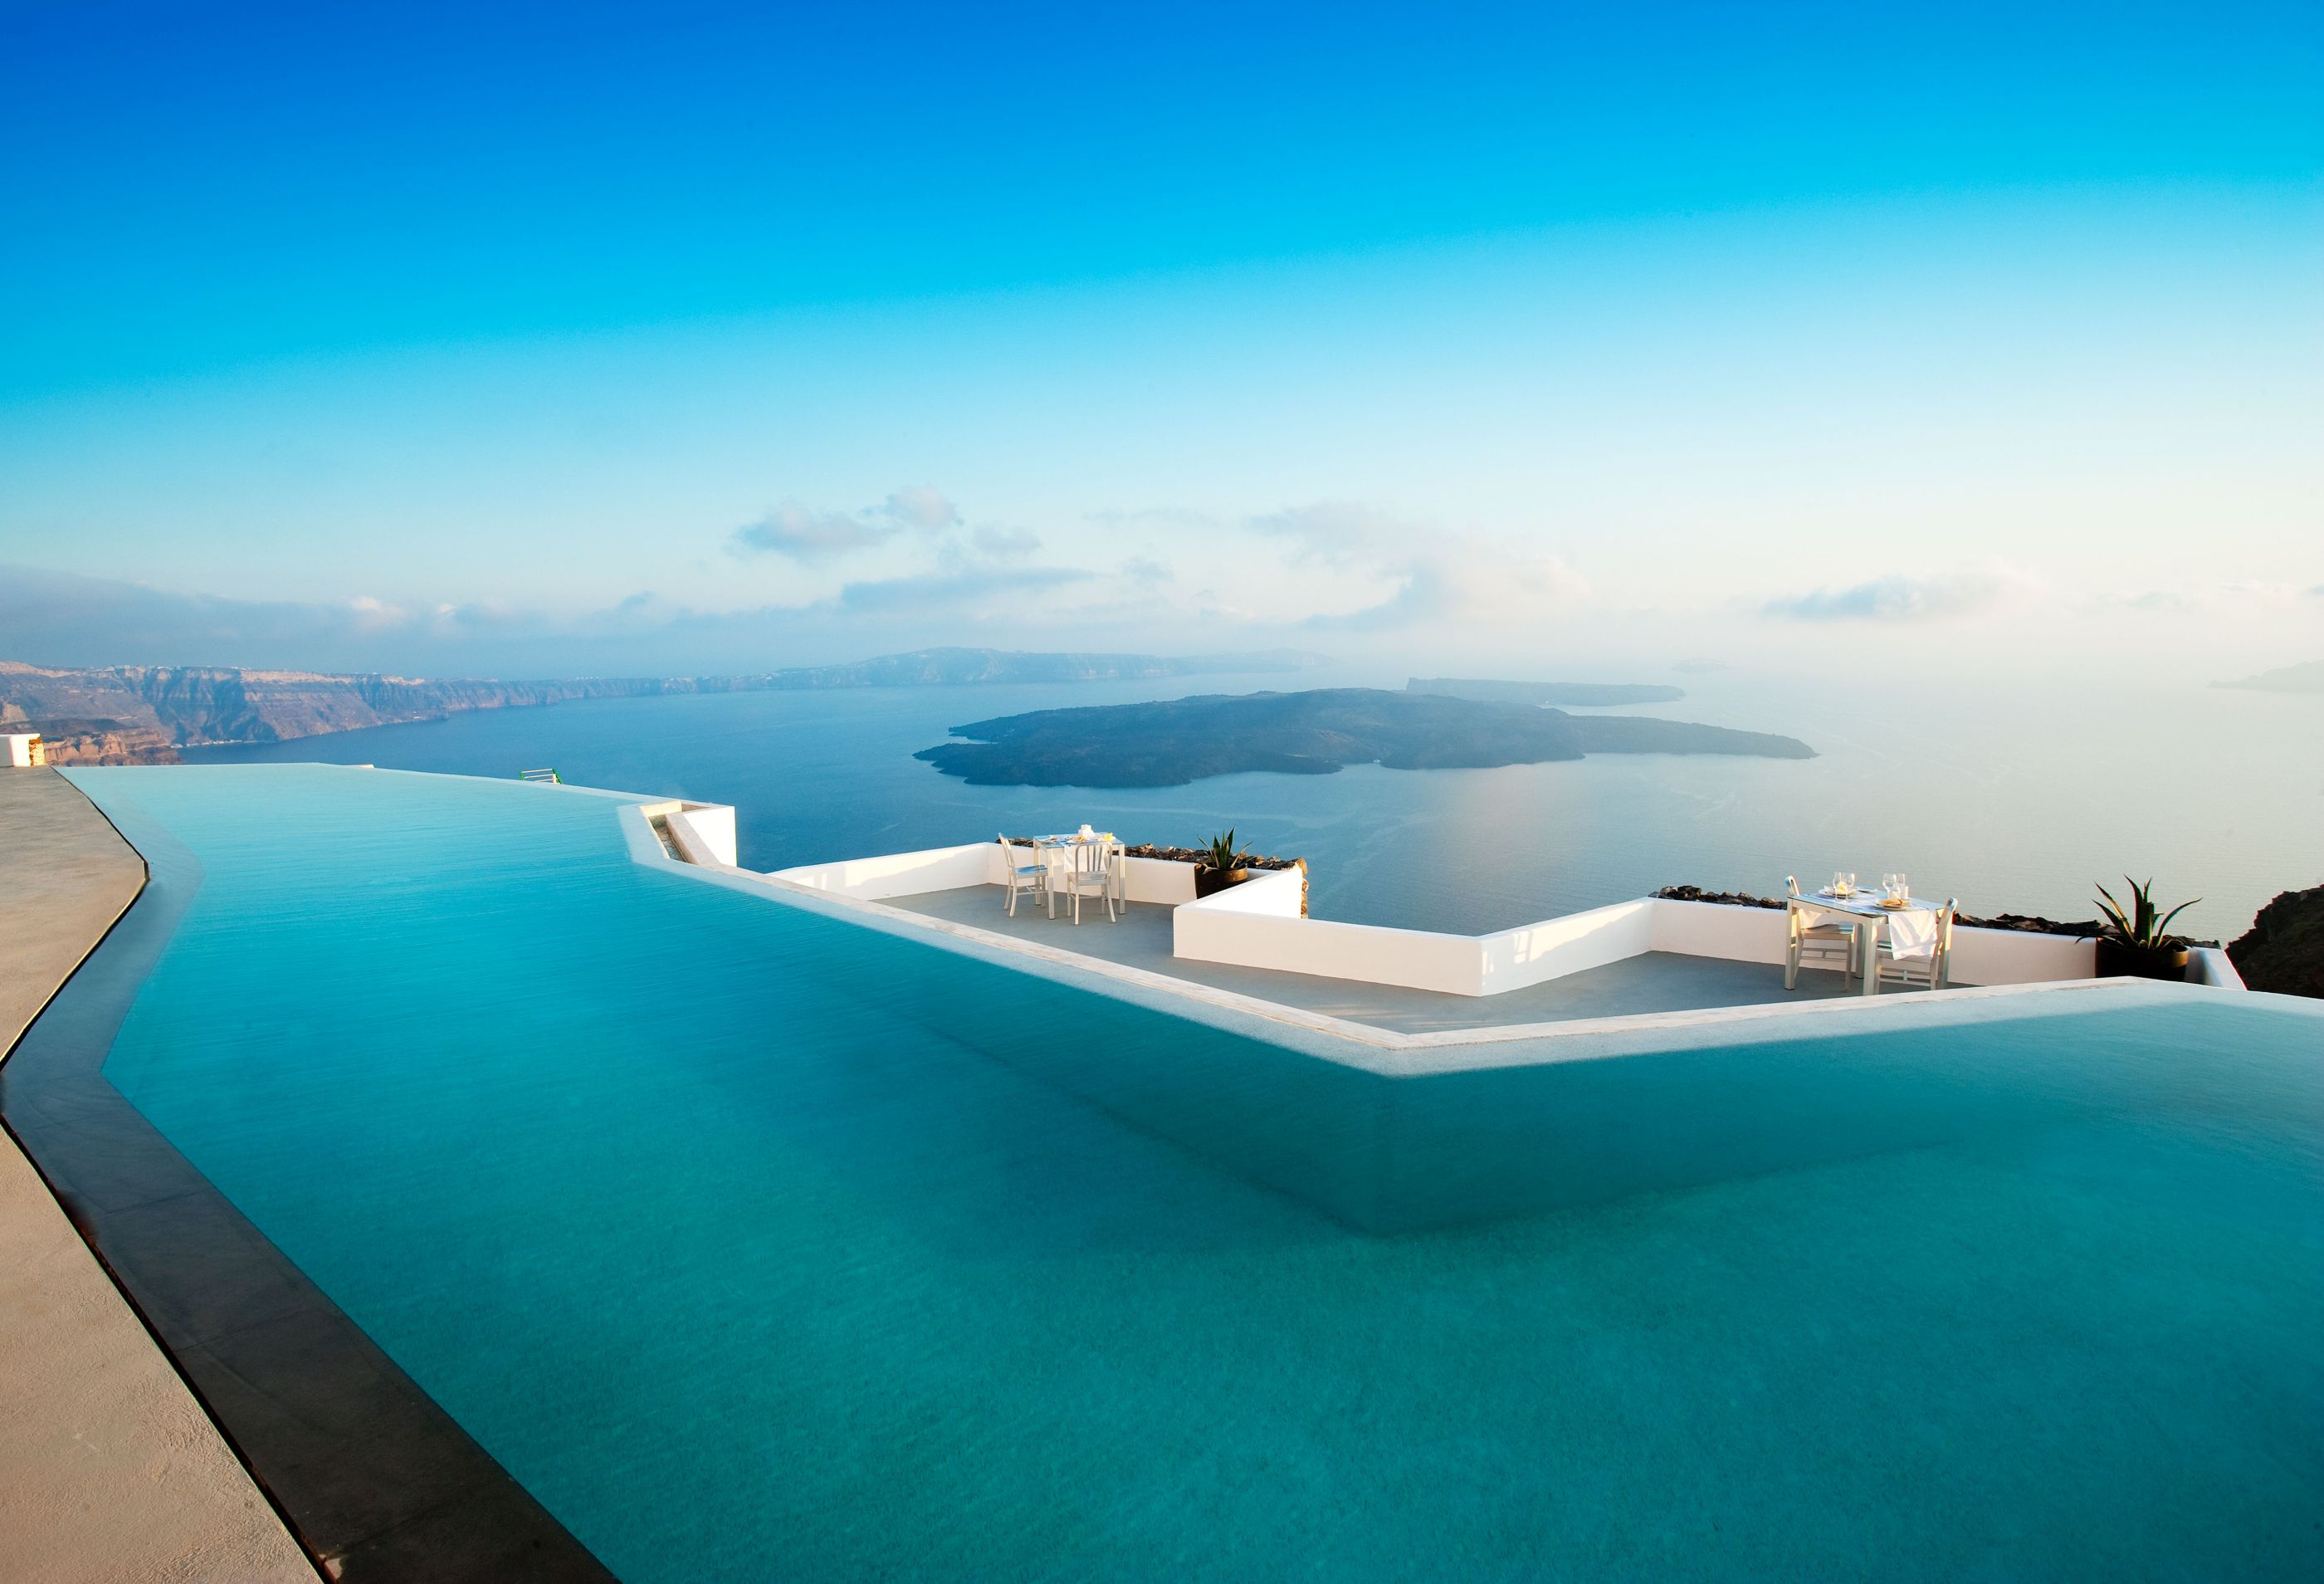 The infinity pool with sea view from Grace Hotel Santorini in Mykonos, Greece